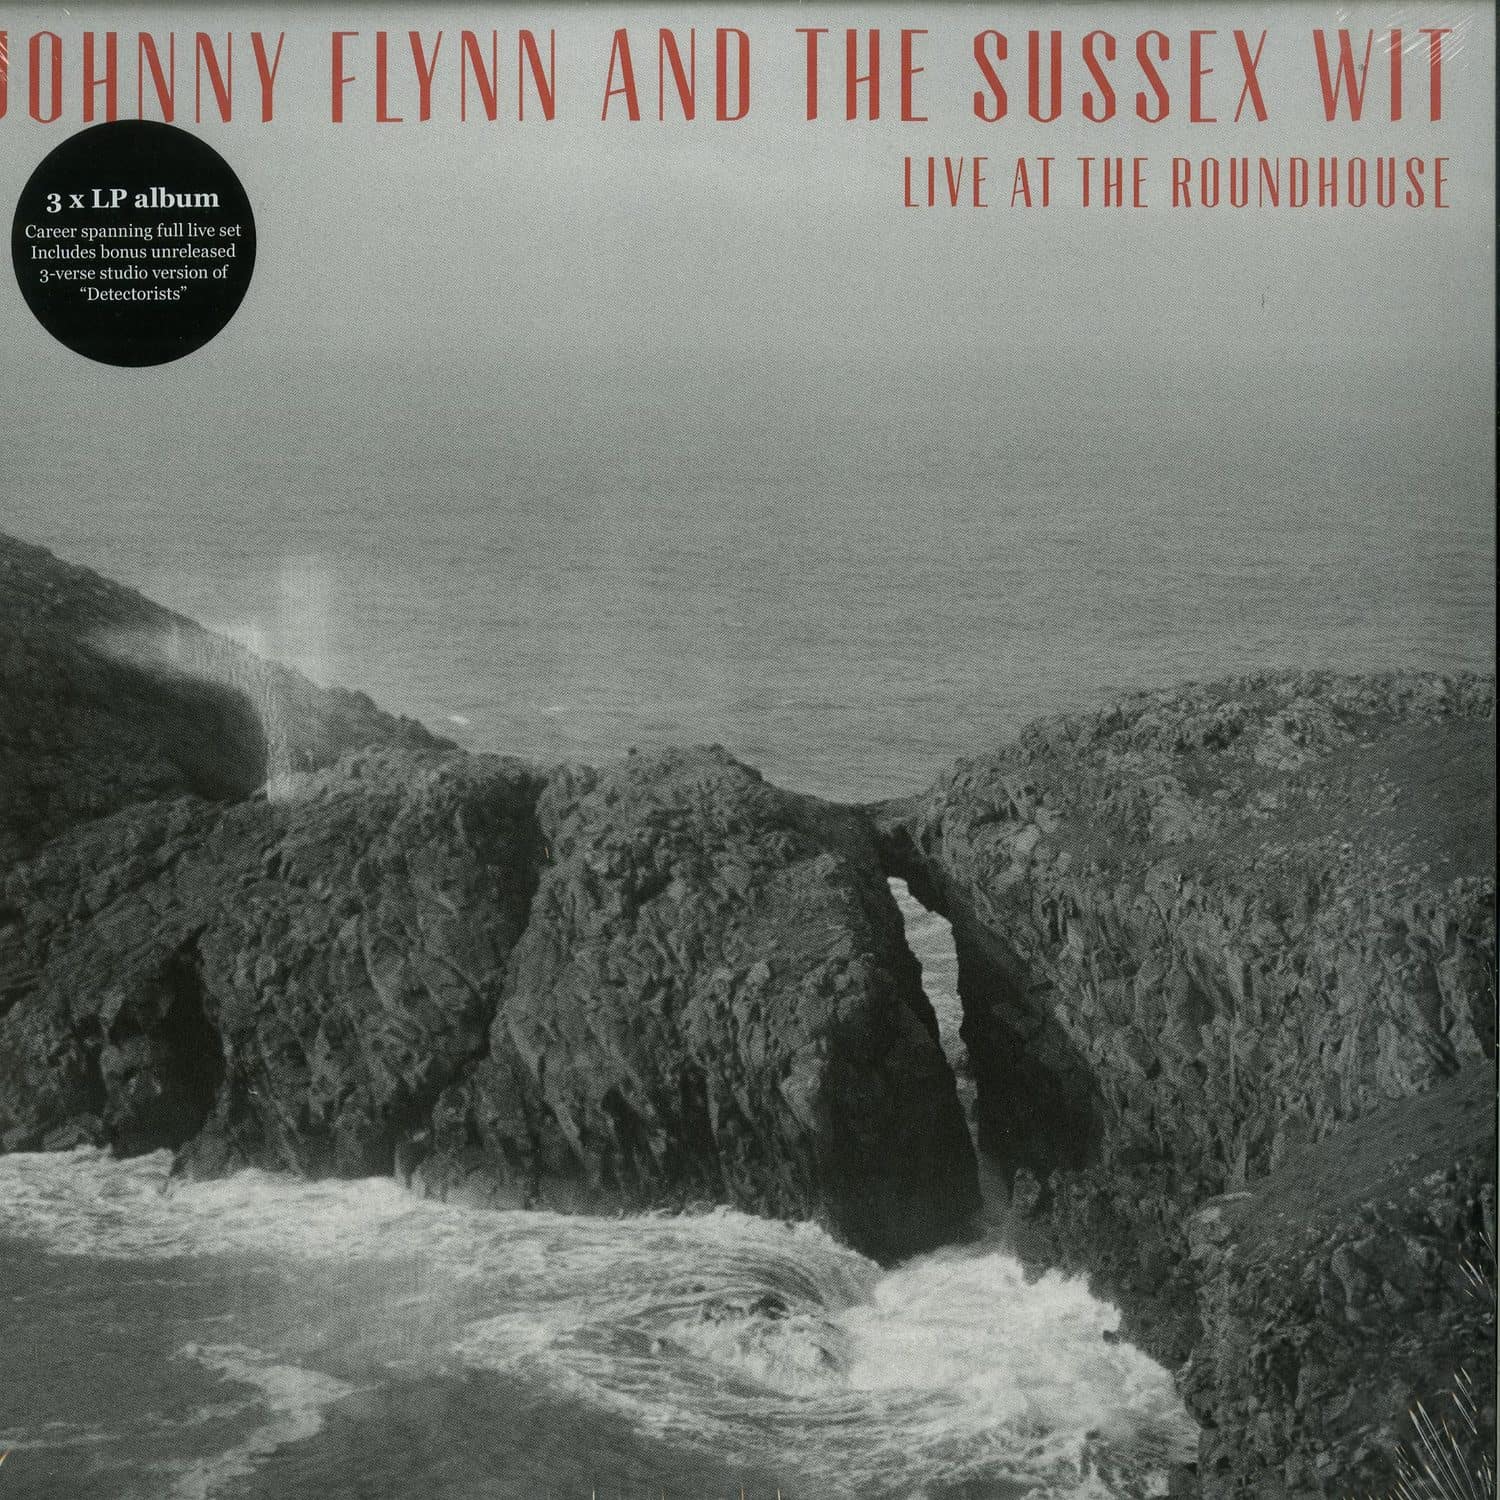 Johnny Flynn and the Sussex Wit - LIVE AT THE ROUNDHOUSE 